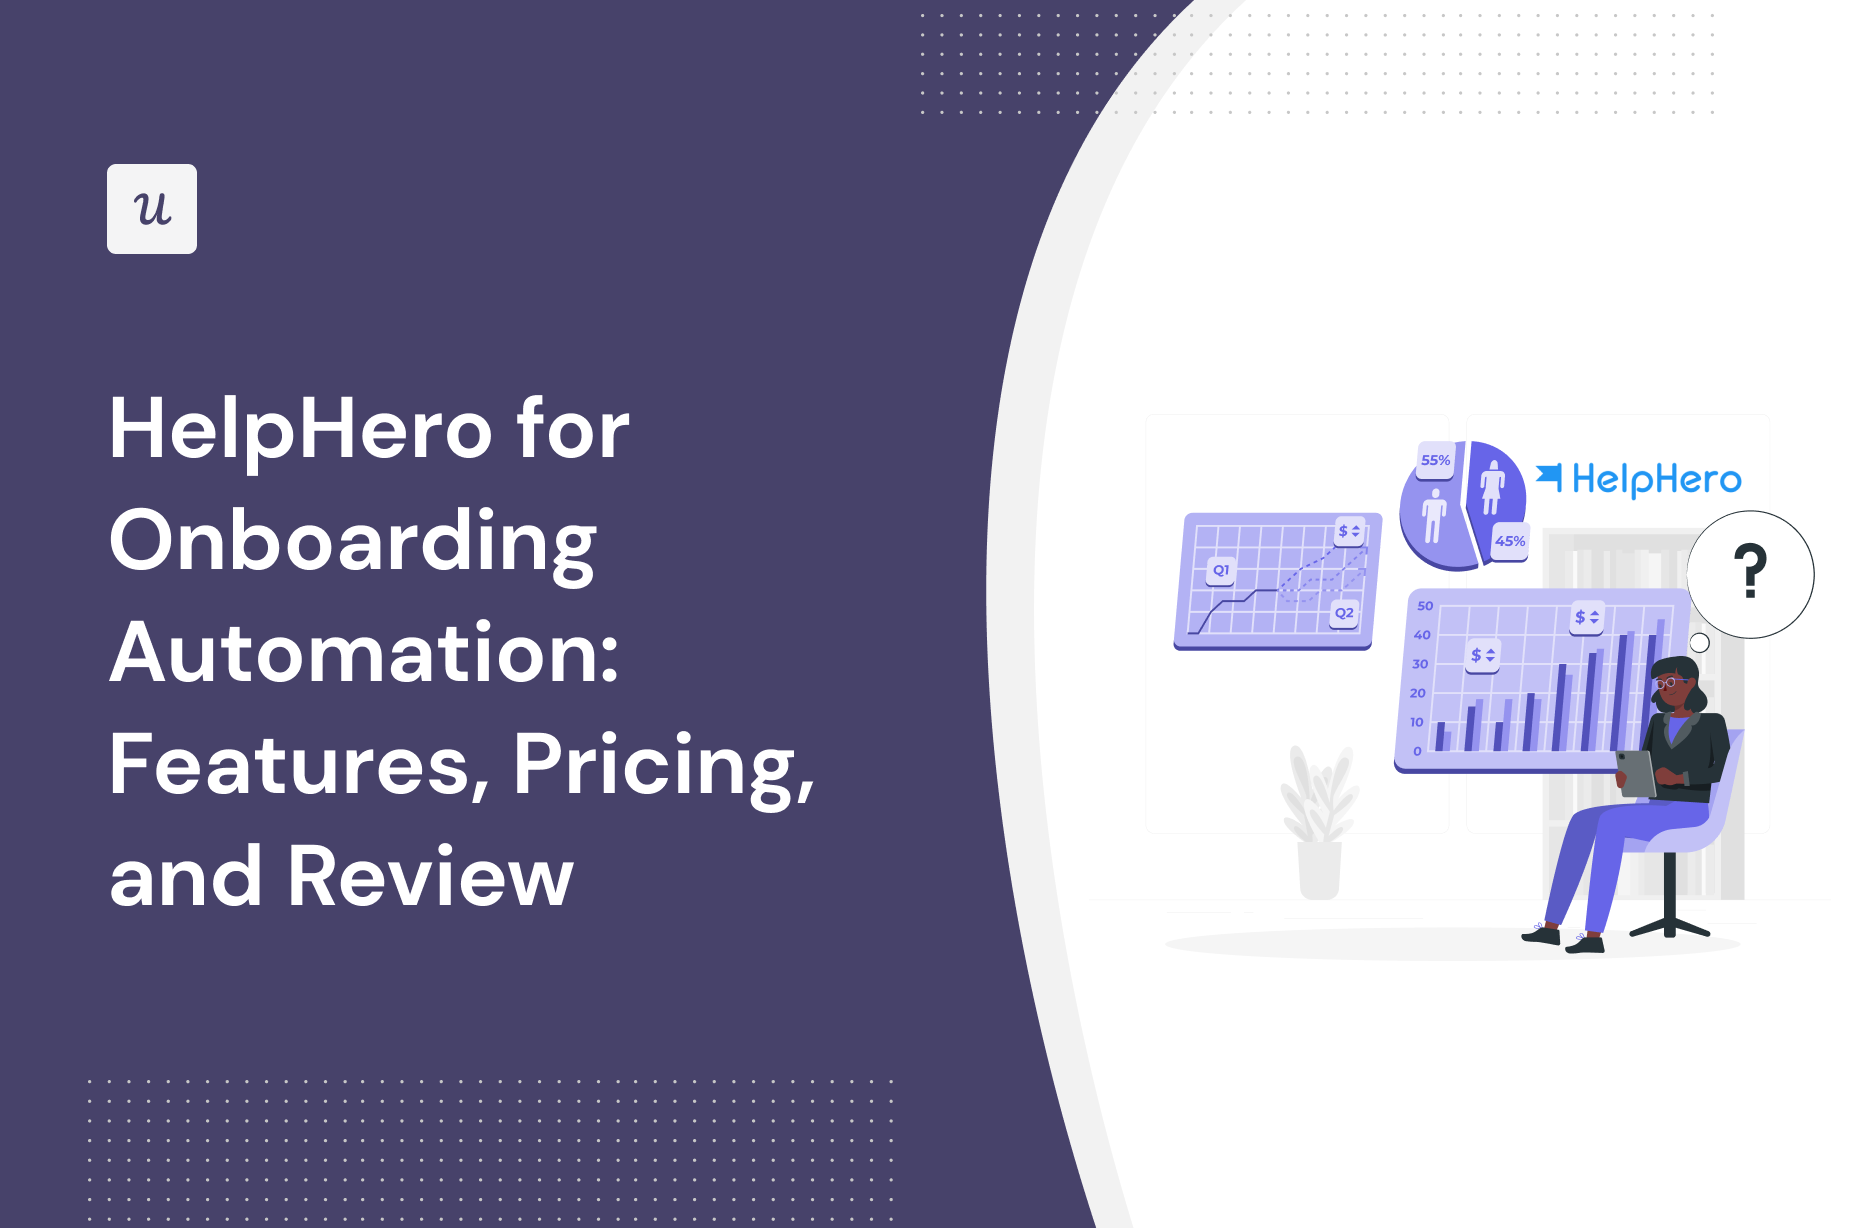 HelpHero for Onboarding Automation: Features, Pricing, and Review